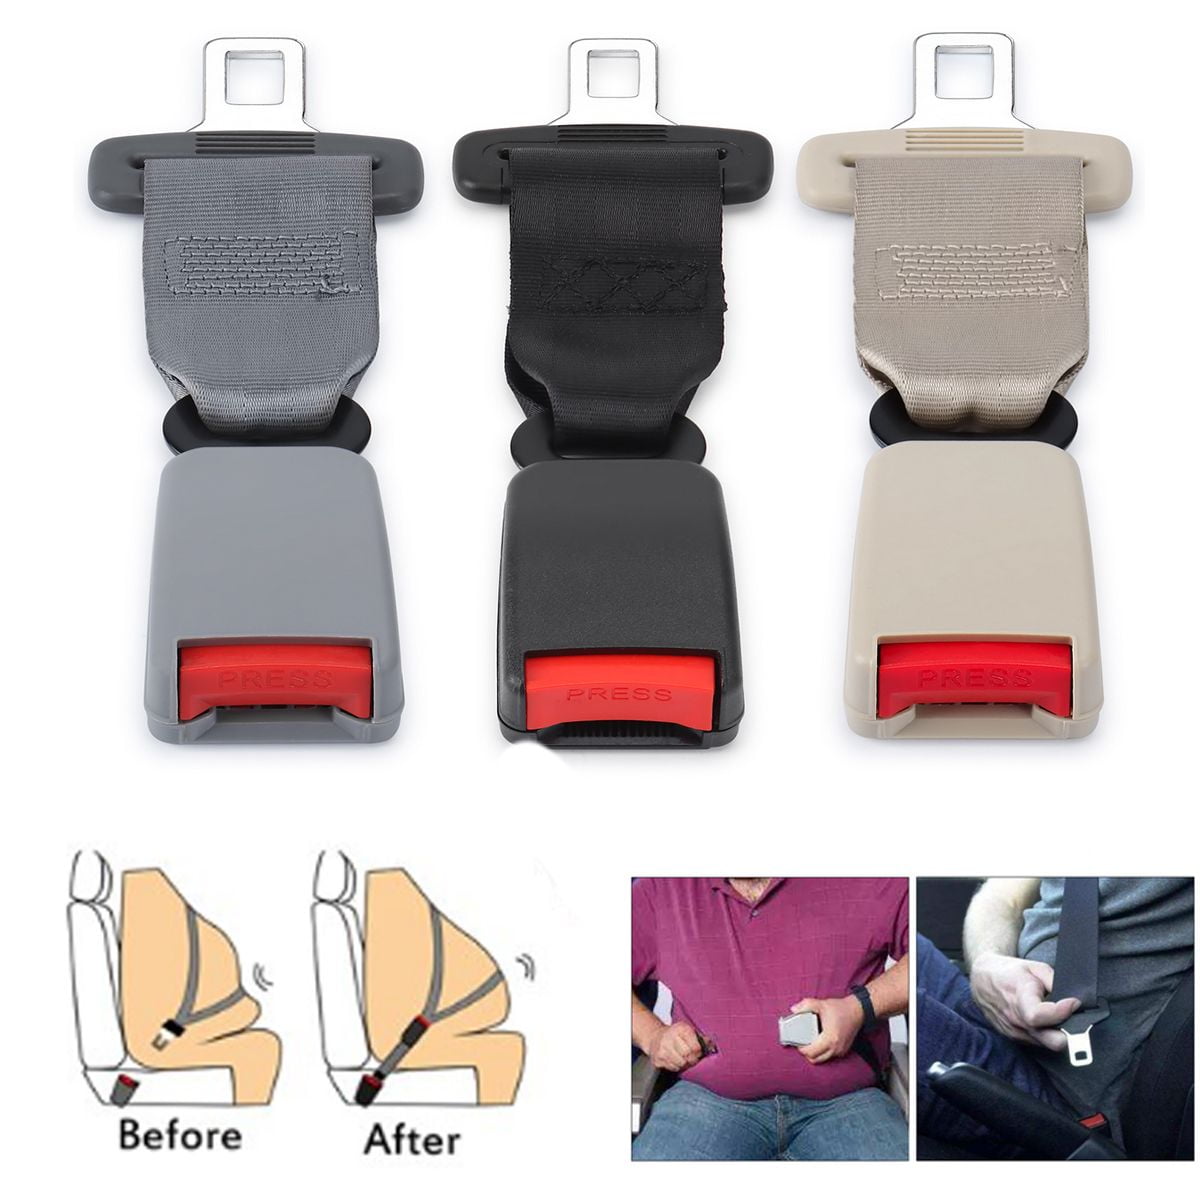 Seatbelt Extension Buckle Universal Buckle Release Tool ,Seat Belt Extender for Car for Obese Men Pregnant Women,Children,2 Packs 7/8 inch Metal Tongue 10Inch 